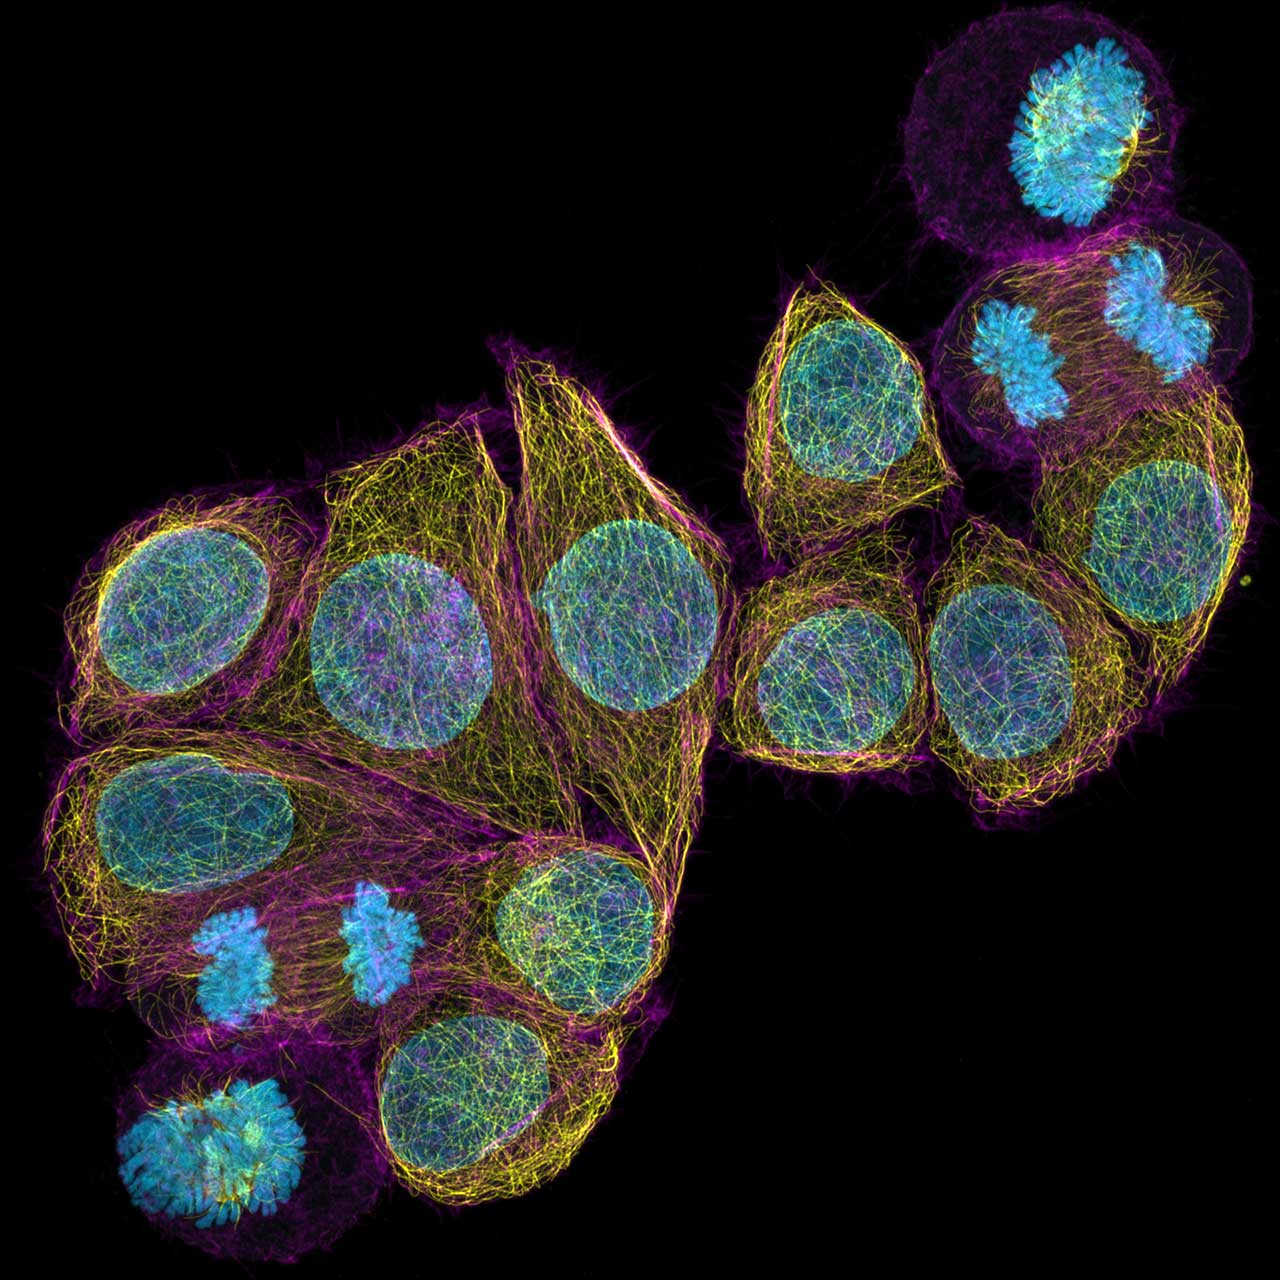 Cell Imaging with Fluorescence Microscopy